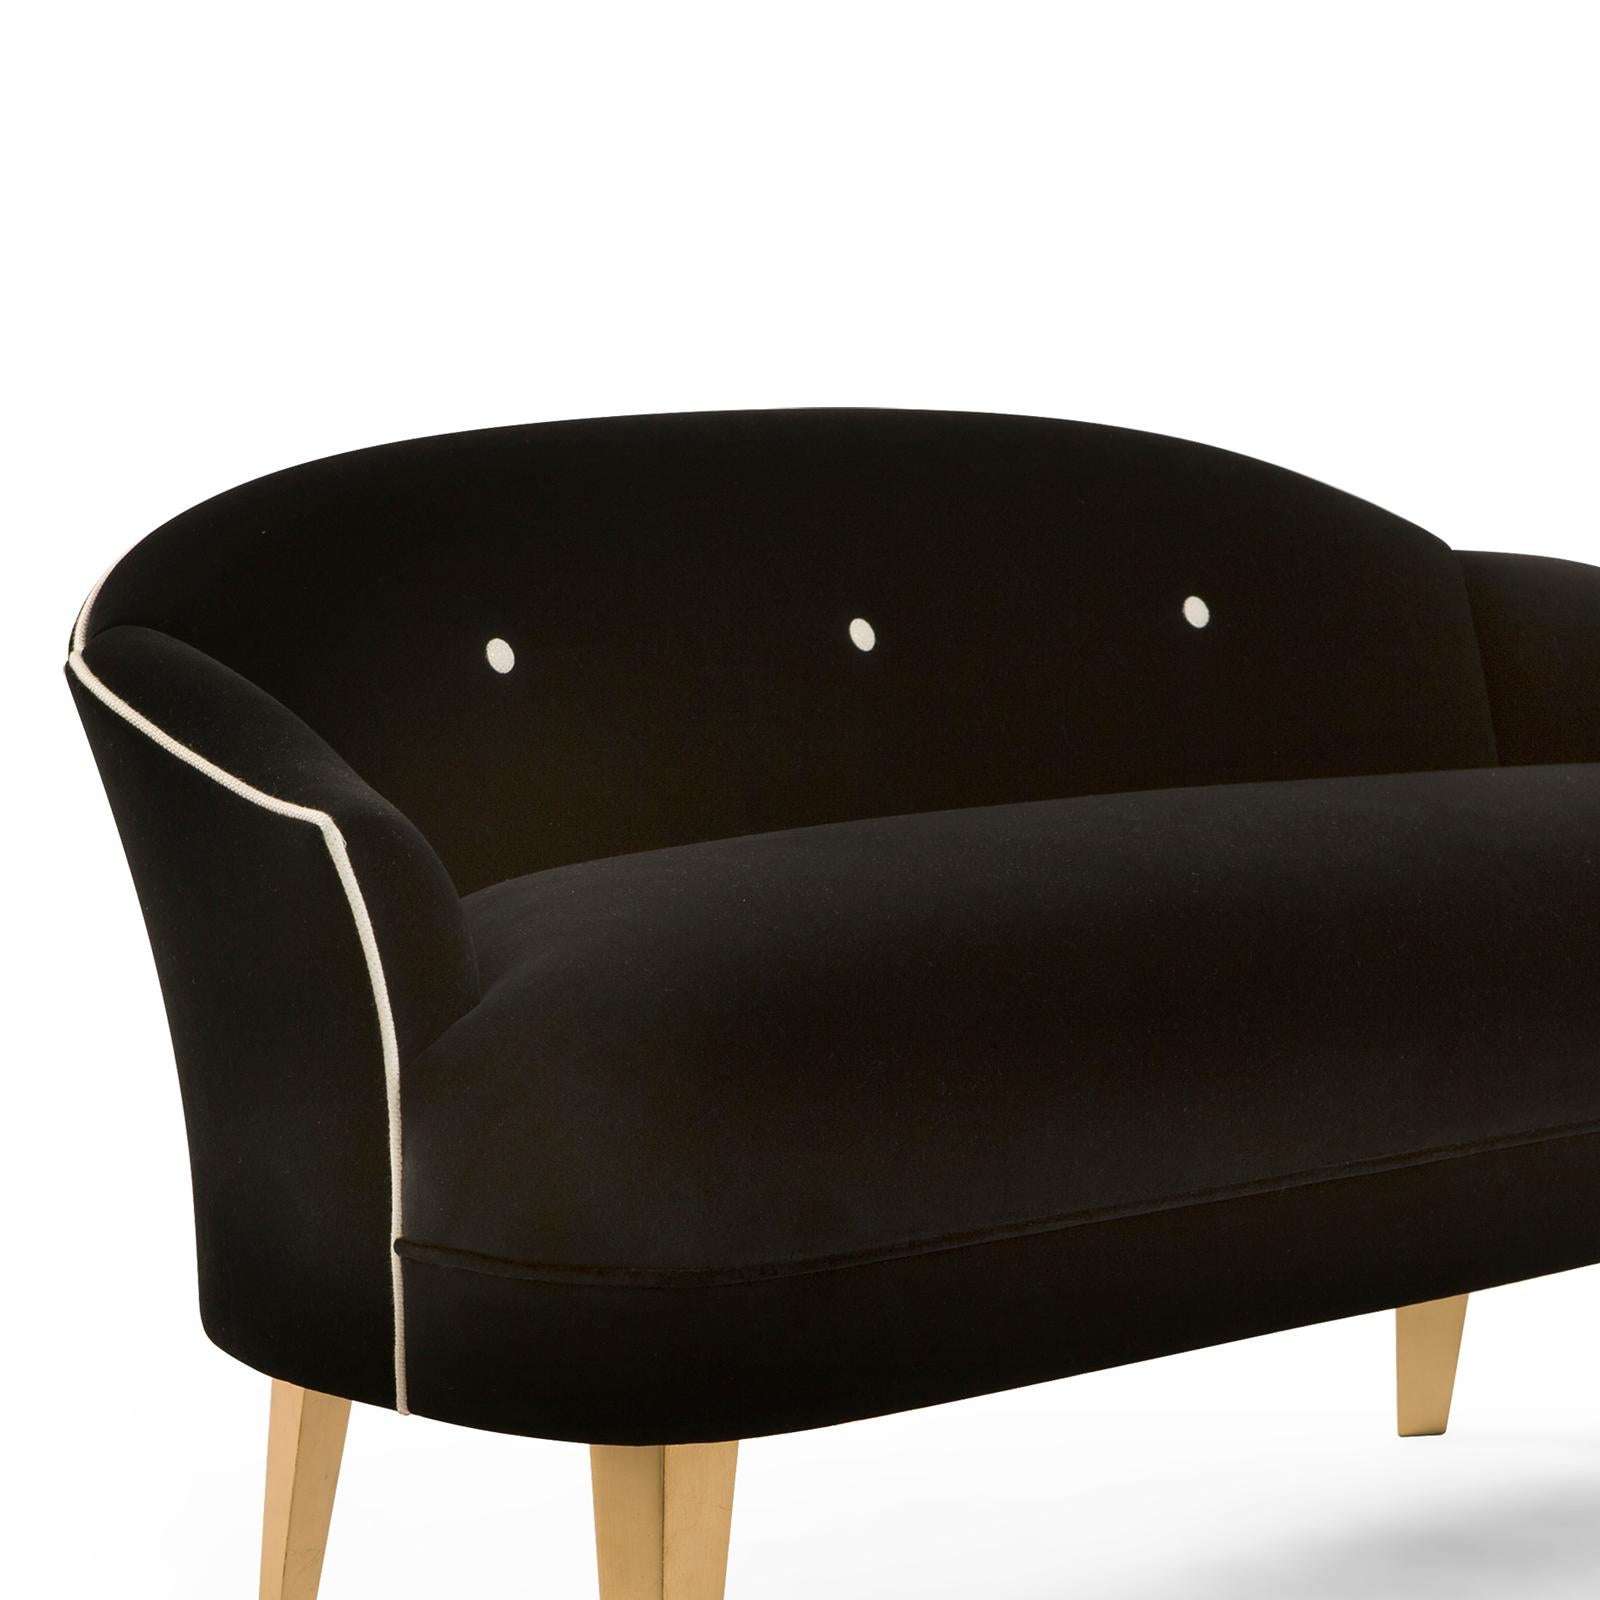 Sofa Frenchy with structure in solid wood.
Covered with black velvet fabric high quality
fabric. Feet in solid wood with gold finish painting.
Also available with other fabrics on request.